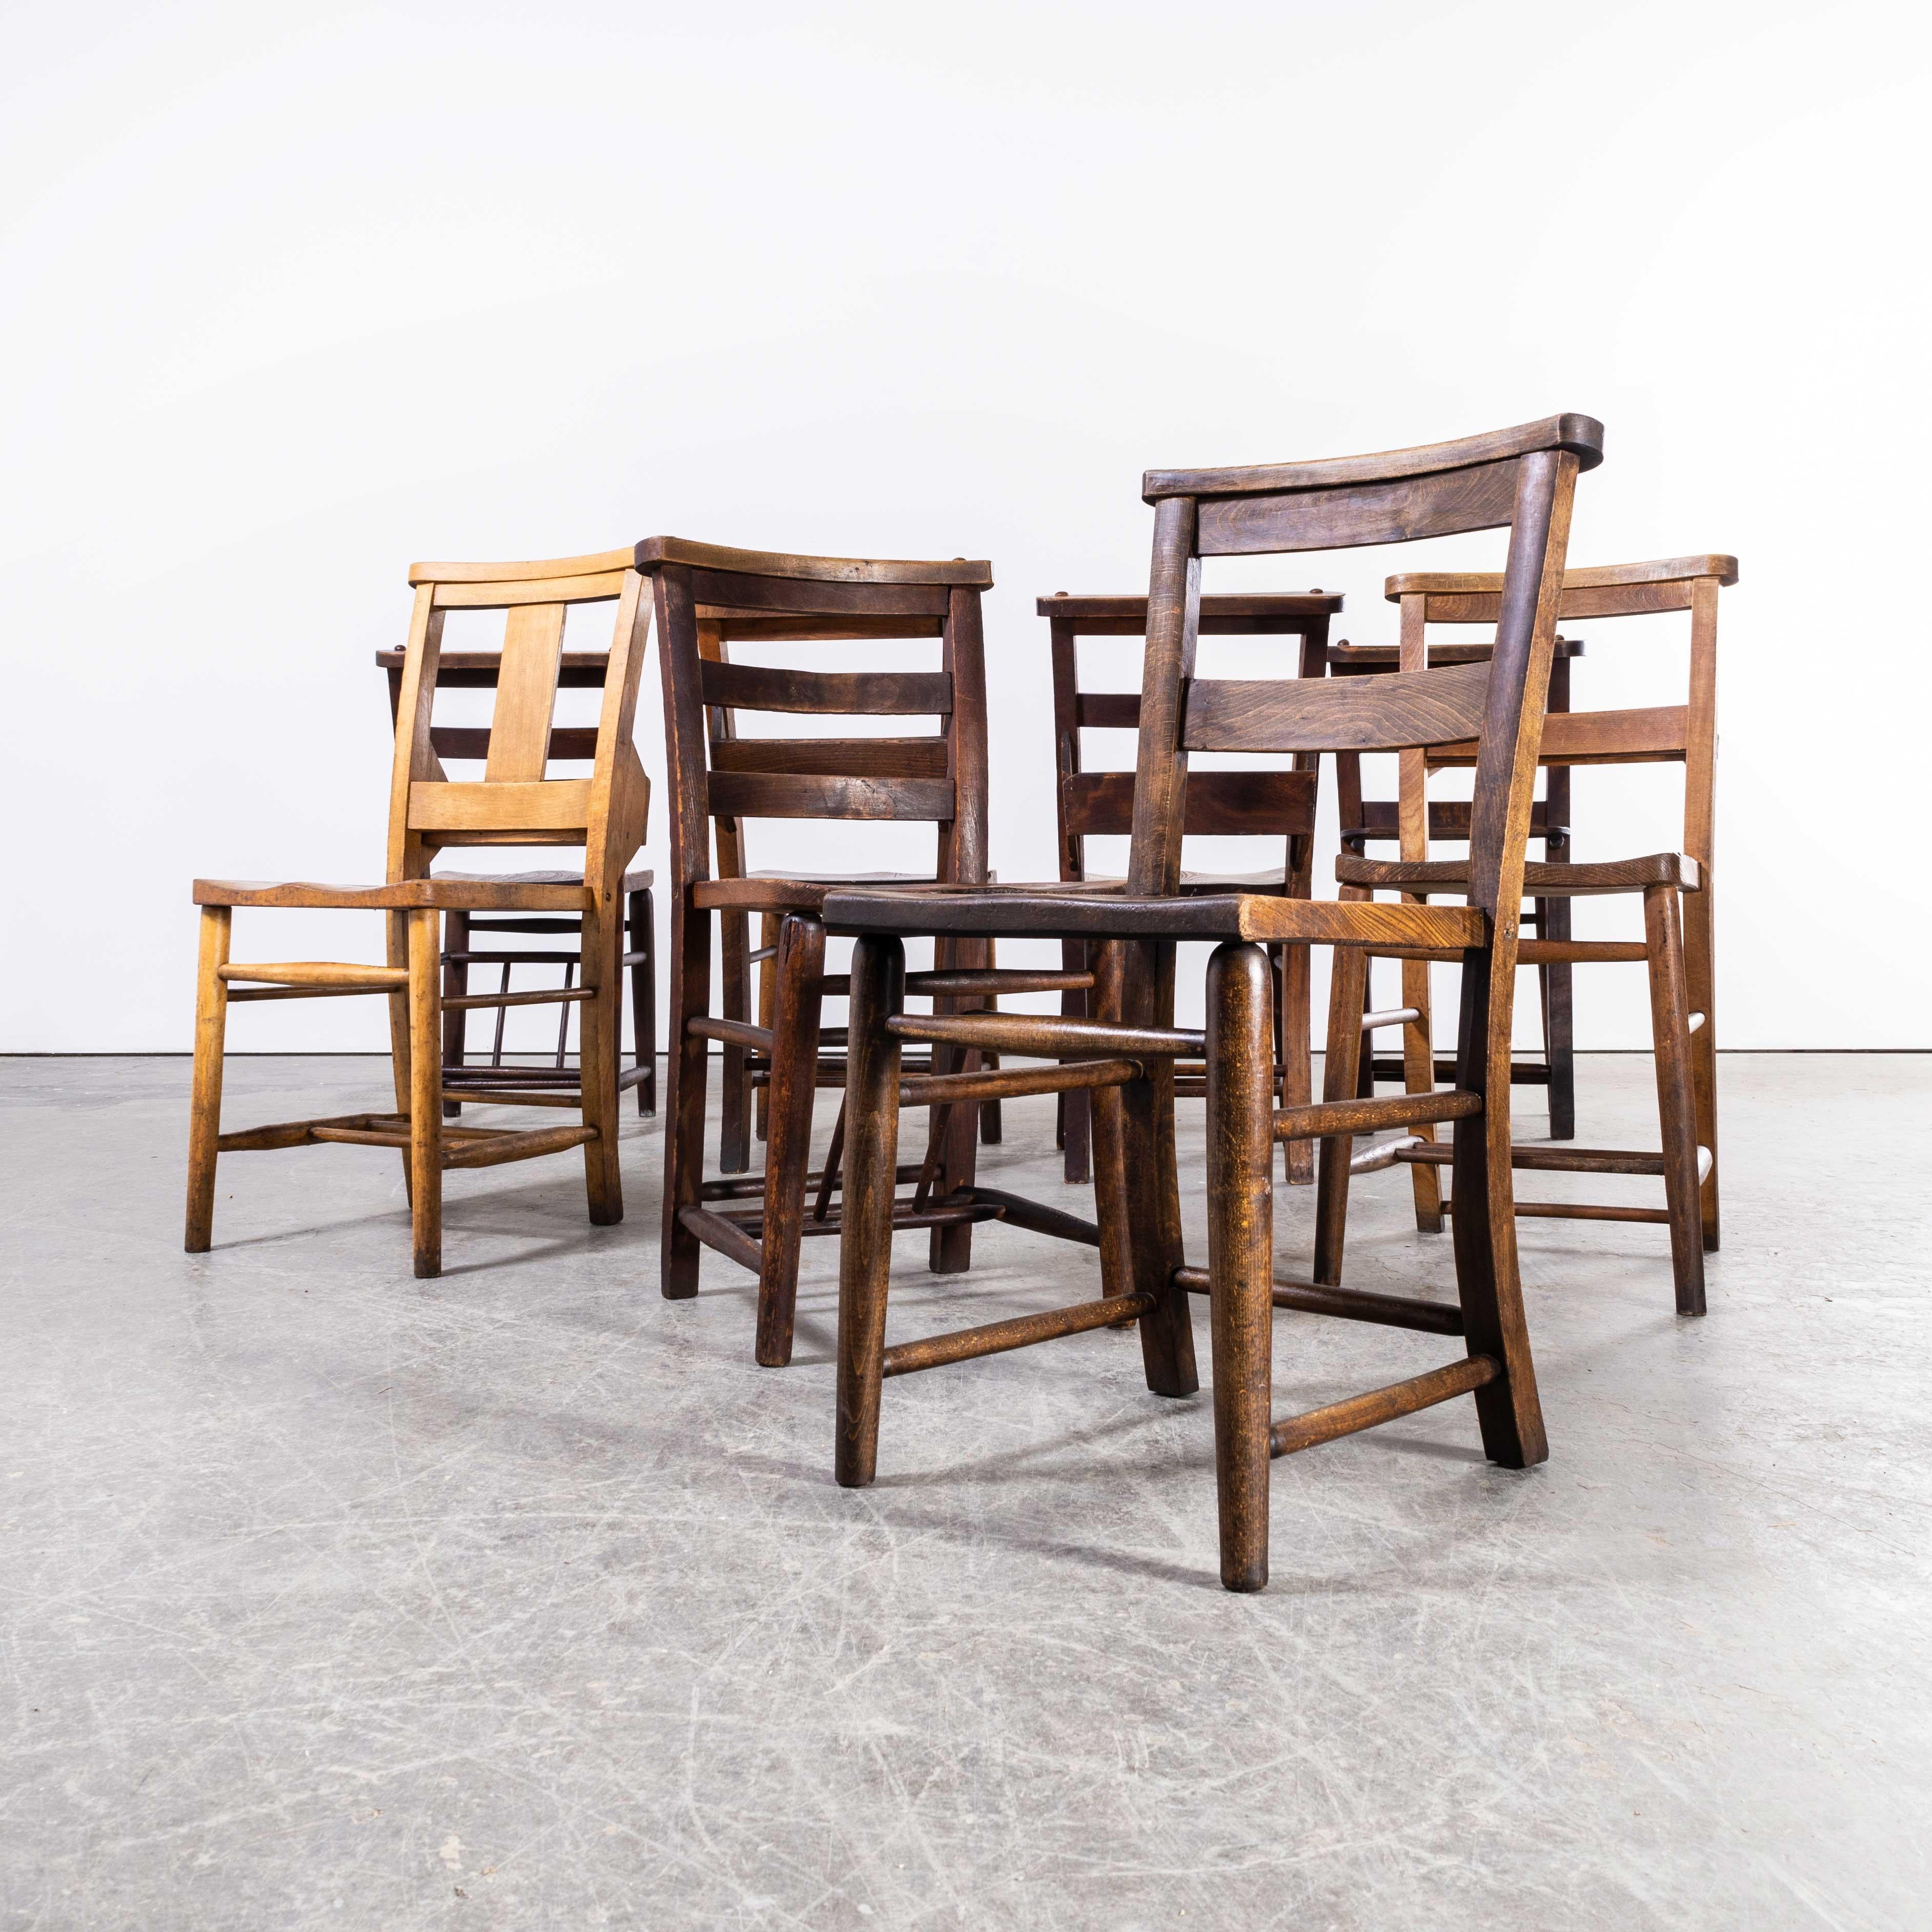 1960’s Elm and ash church – chapel dining chairs – harlequin set of eight
1960’s Elm and ash church – chapel dining chairs – harlequin set of eight. England has a wonderfully rich heritage for making chairs. At the height of production at the turn